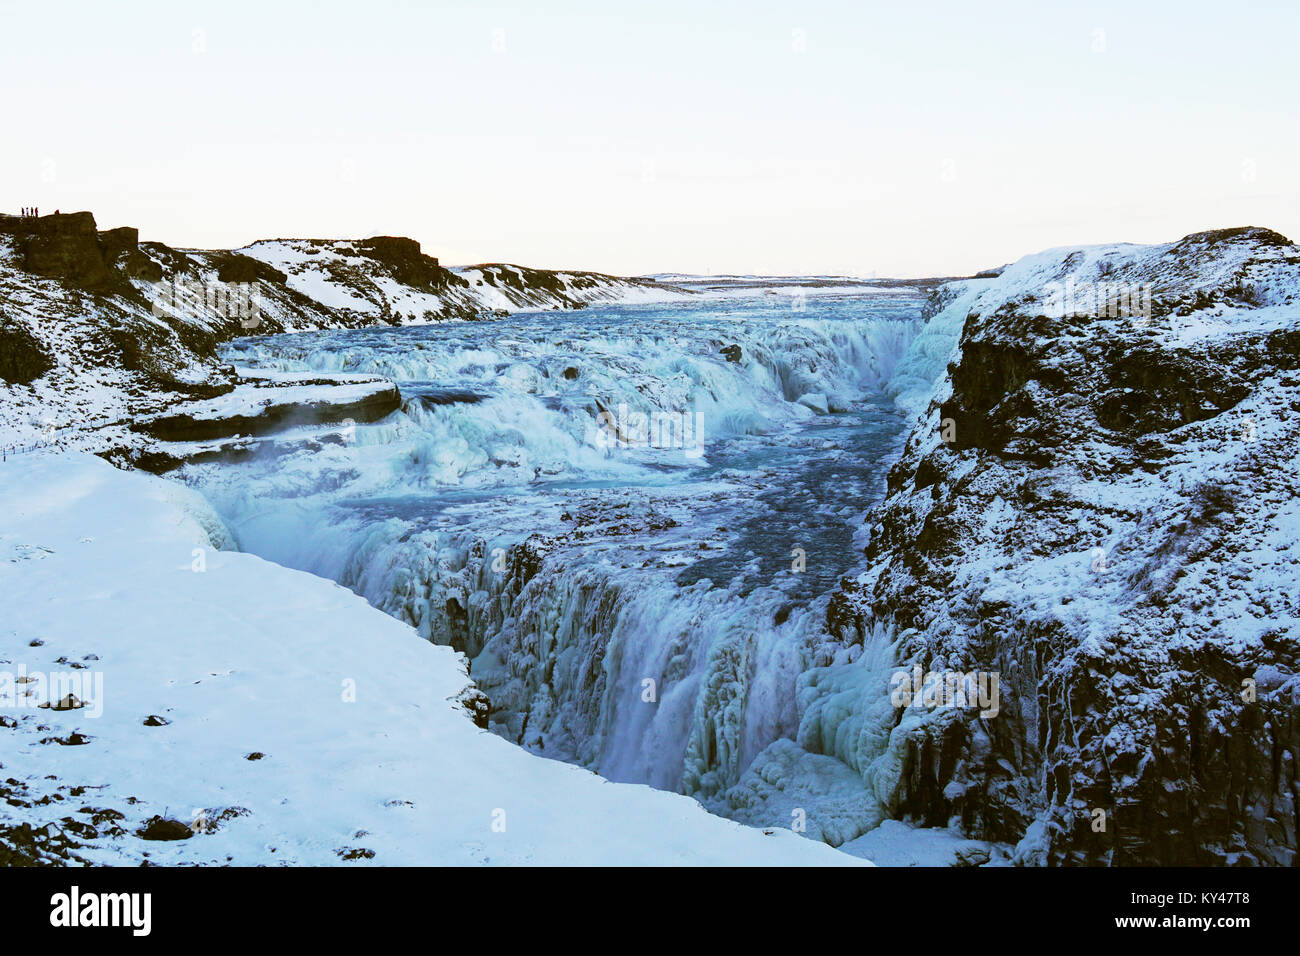 Image of the Gulfoss Waterfalls on the Hvita Olfusa river in Iceland during Winter. The falls are a much visited tourist attraction in Iceland on the Golden Circle. 2018 image Stock Photo